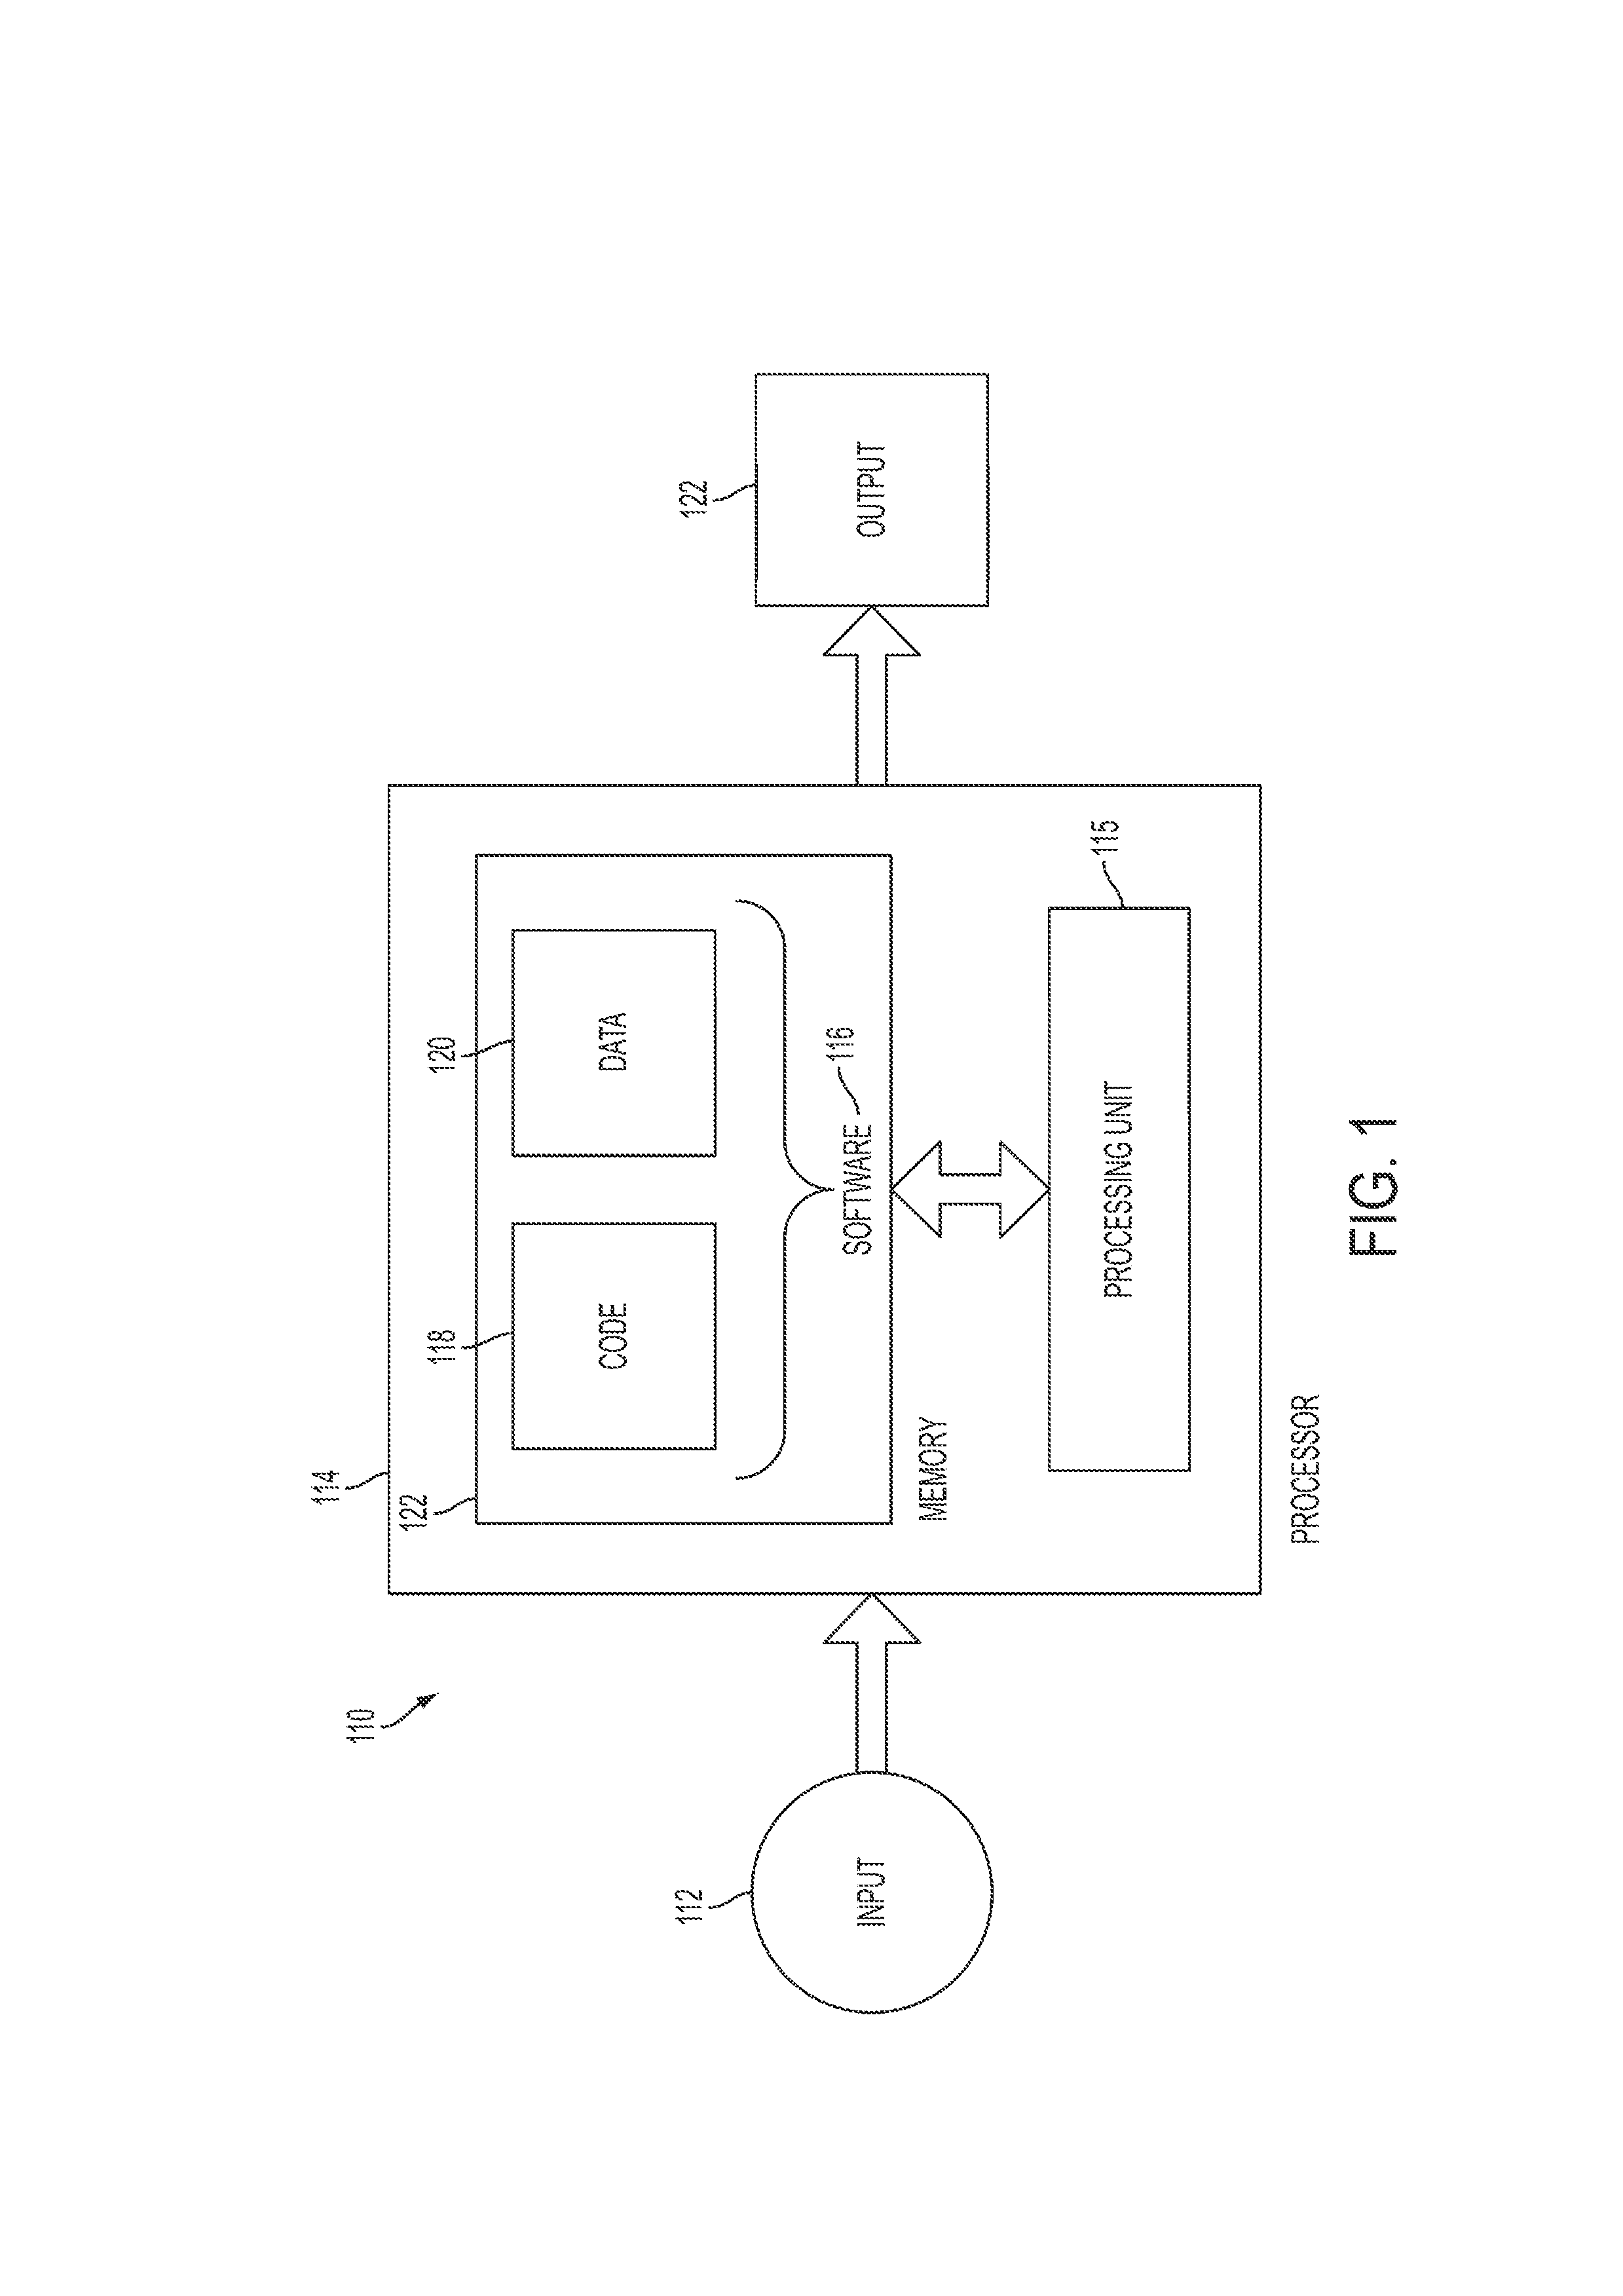 Method, System and Computer Program Product for Optimizing Route Planning Digital Maps